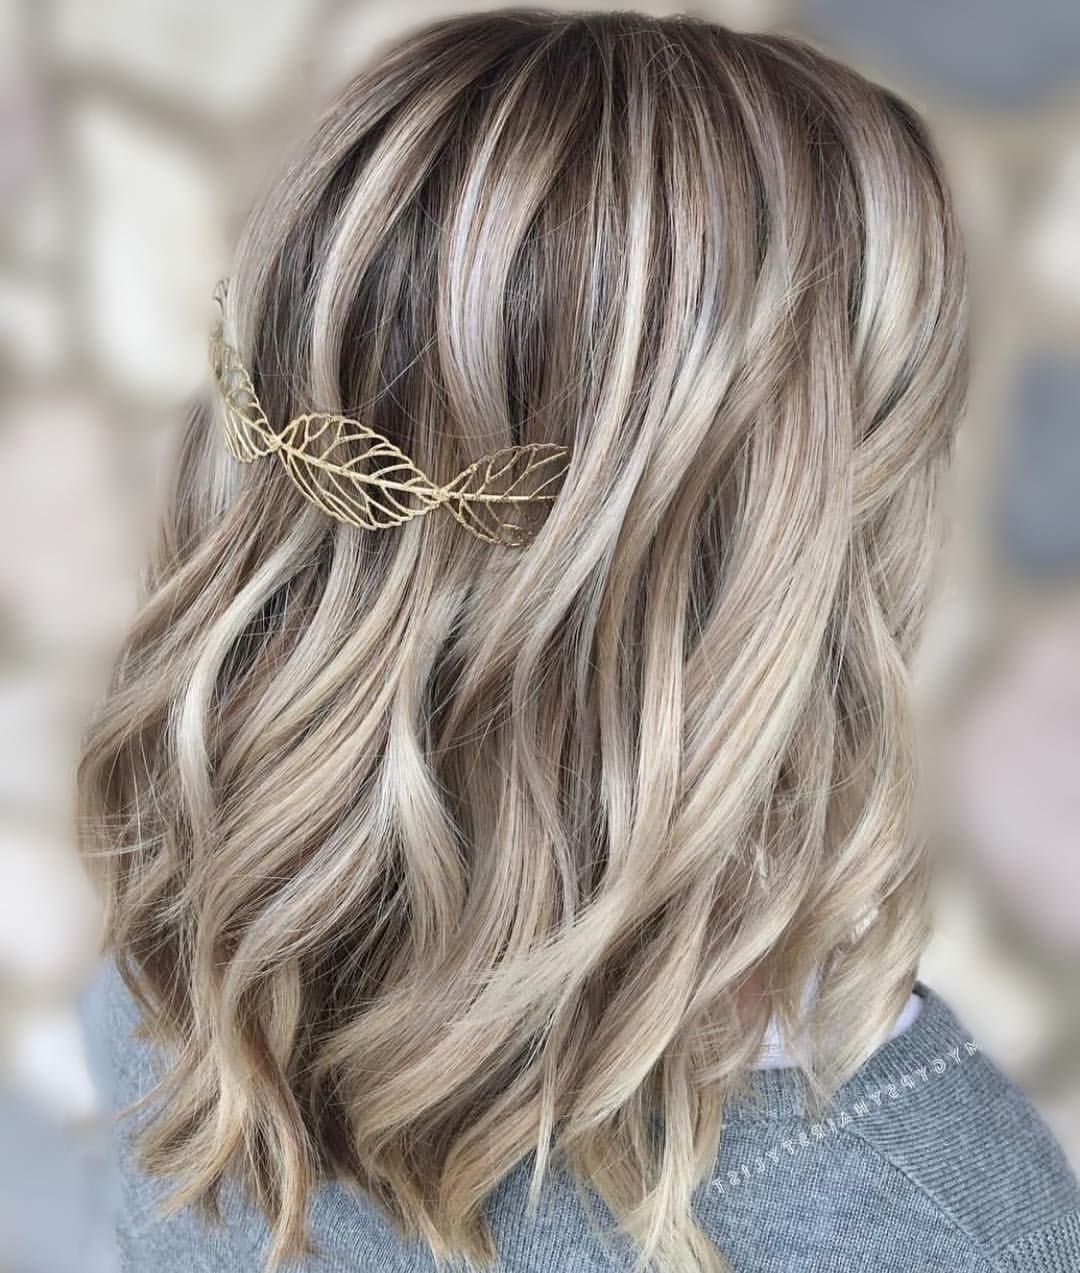 Icy Blonde/ Dimensional Blonde Balayage/ Ashy Blonde/ Low Pertaining To Best And Newest Curly Pixie Hairstyles With Light Blonde Highlights (View 19 of 20)